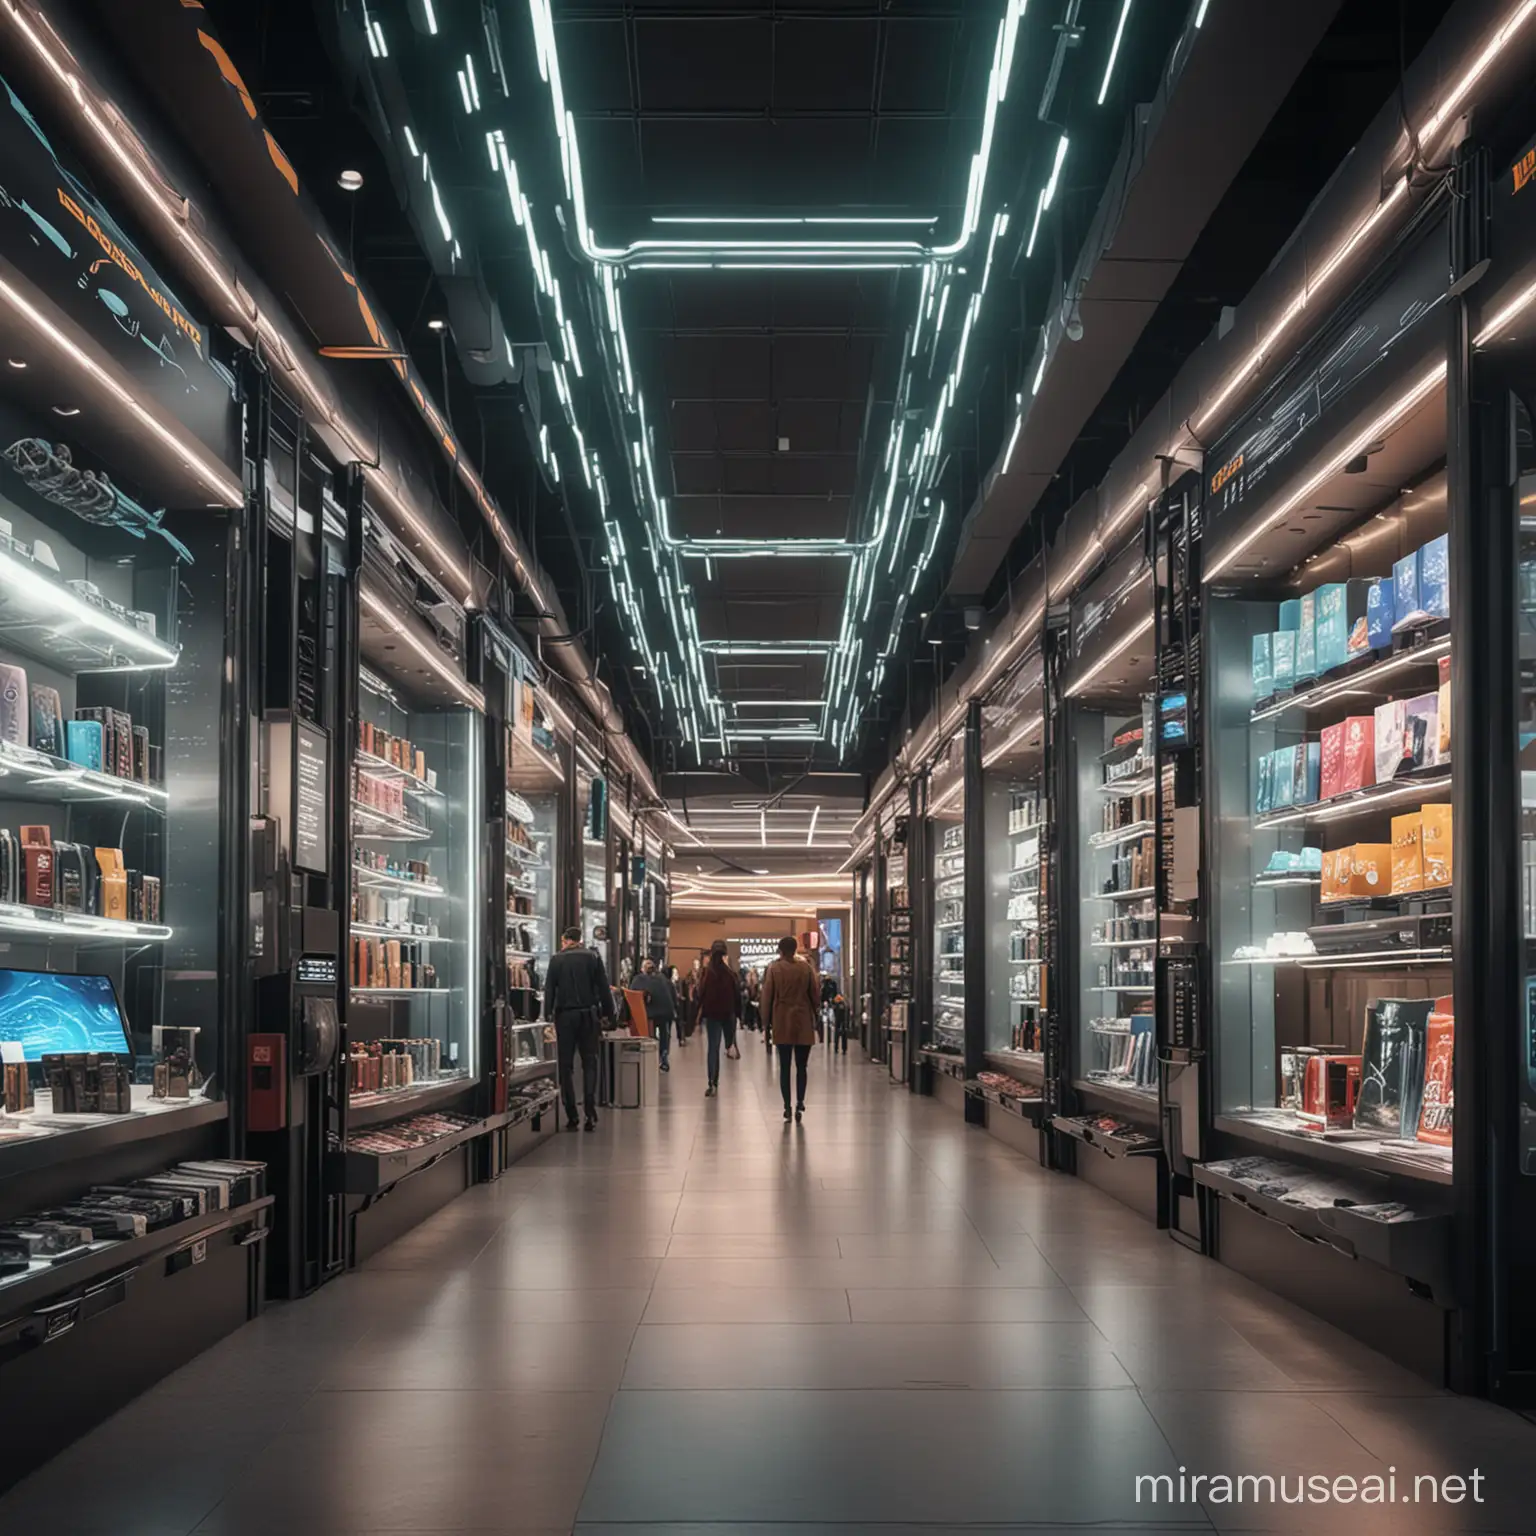 Immersive SciFi Shopping Mall with Futuristic Design and Interactive Displays